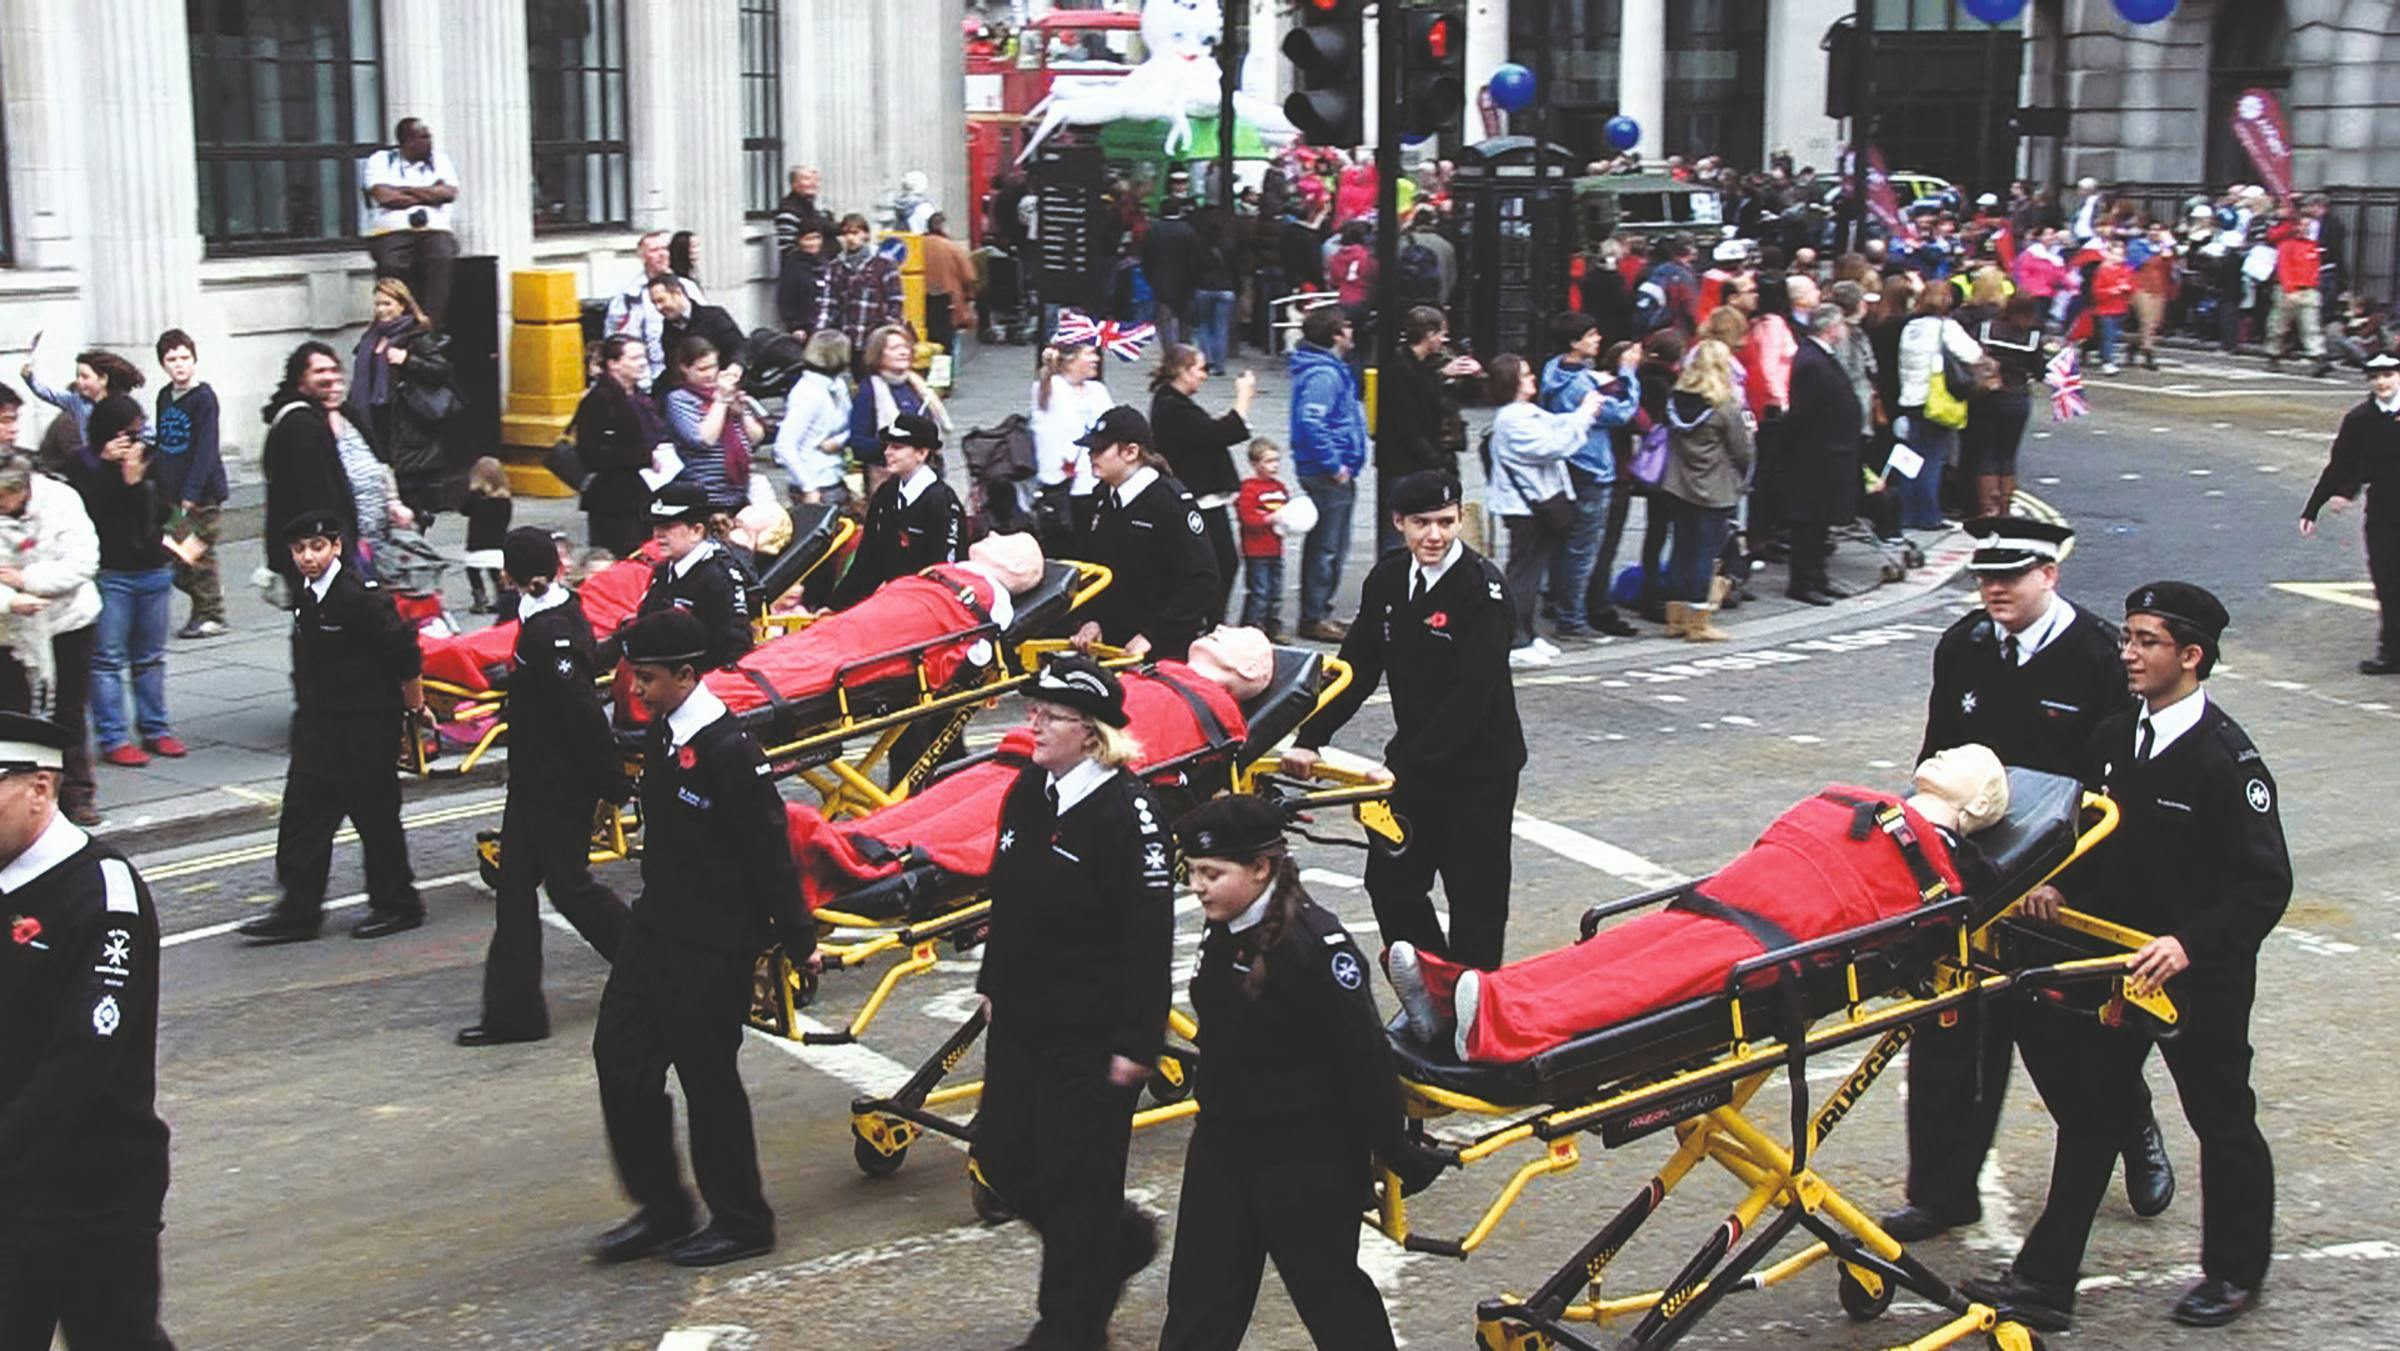 an image of mannequins being wheeled on stretchers by police people in a road. The pavement is lined with people